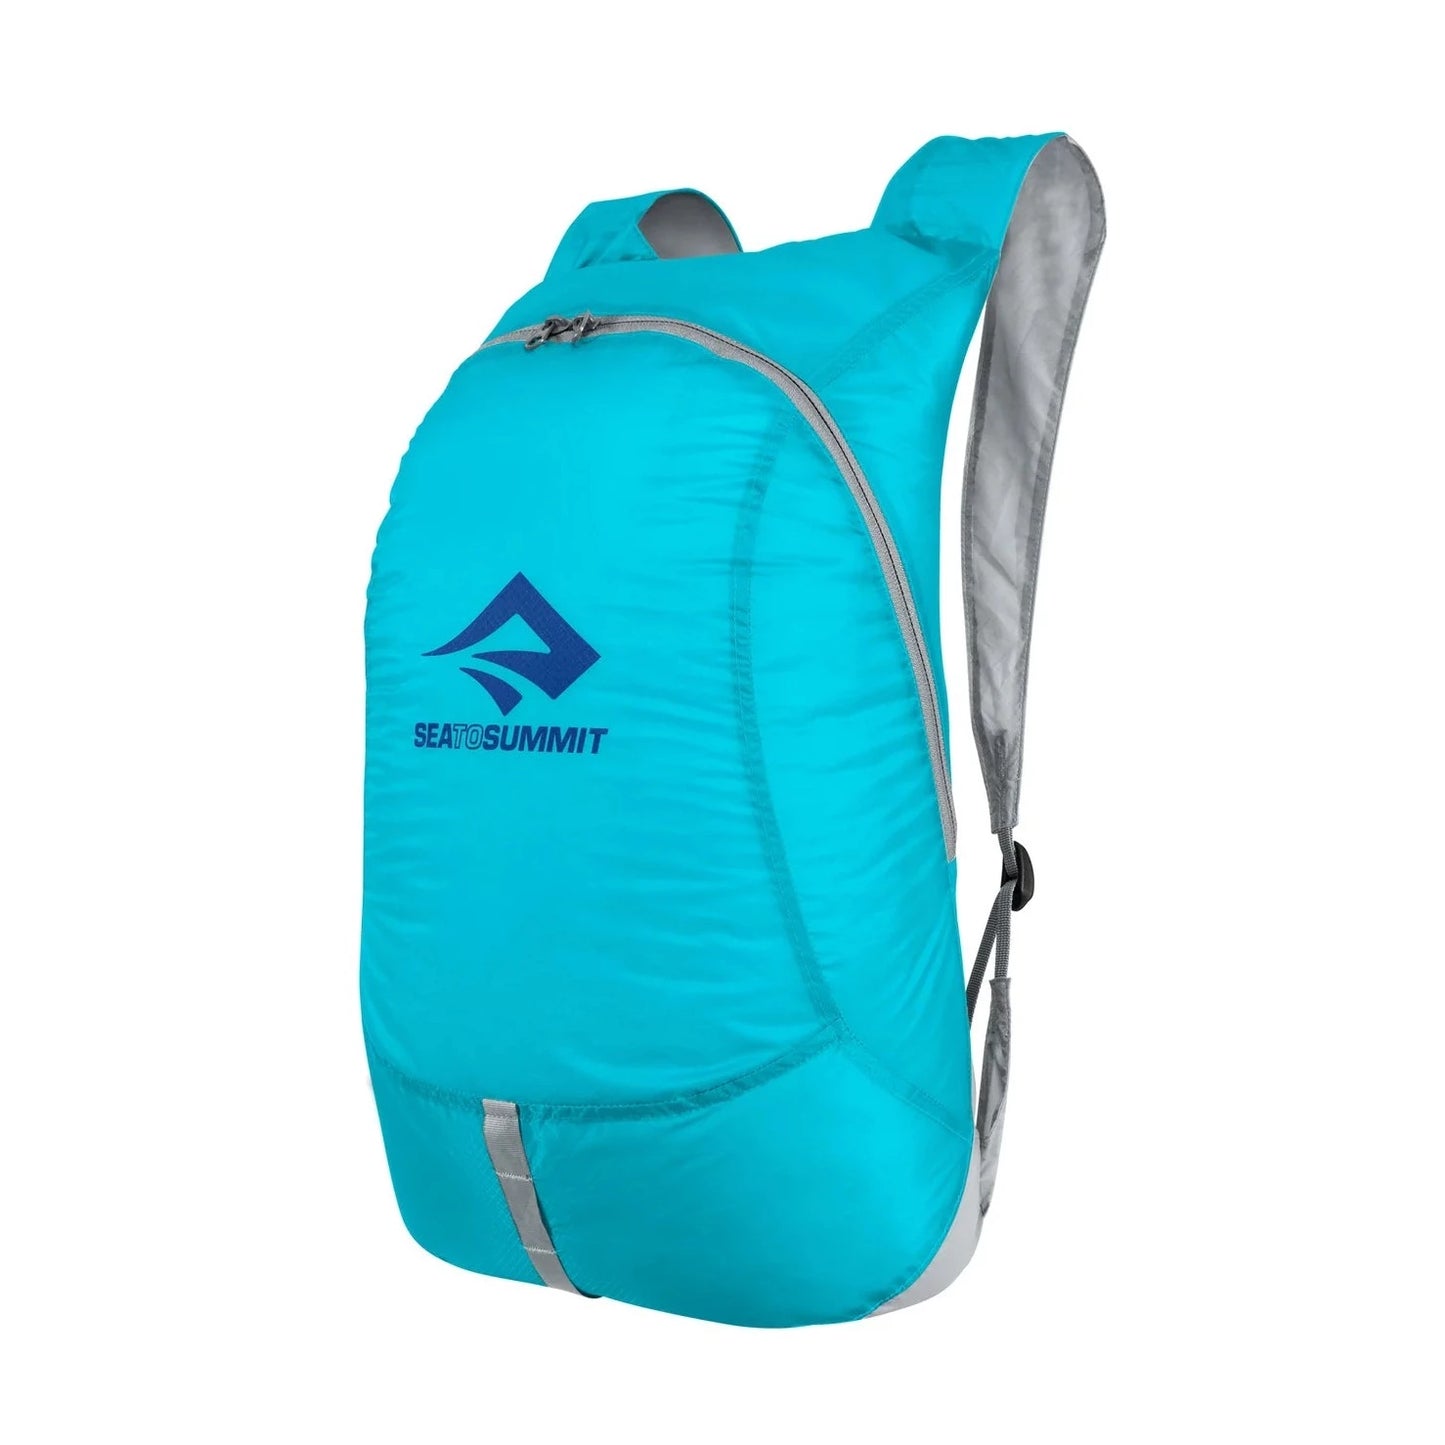 SEA TO SUMMIT DAY PACK 20L BLUE ATOLL